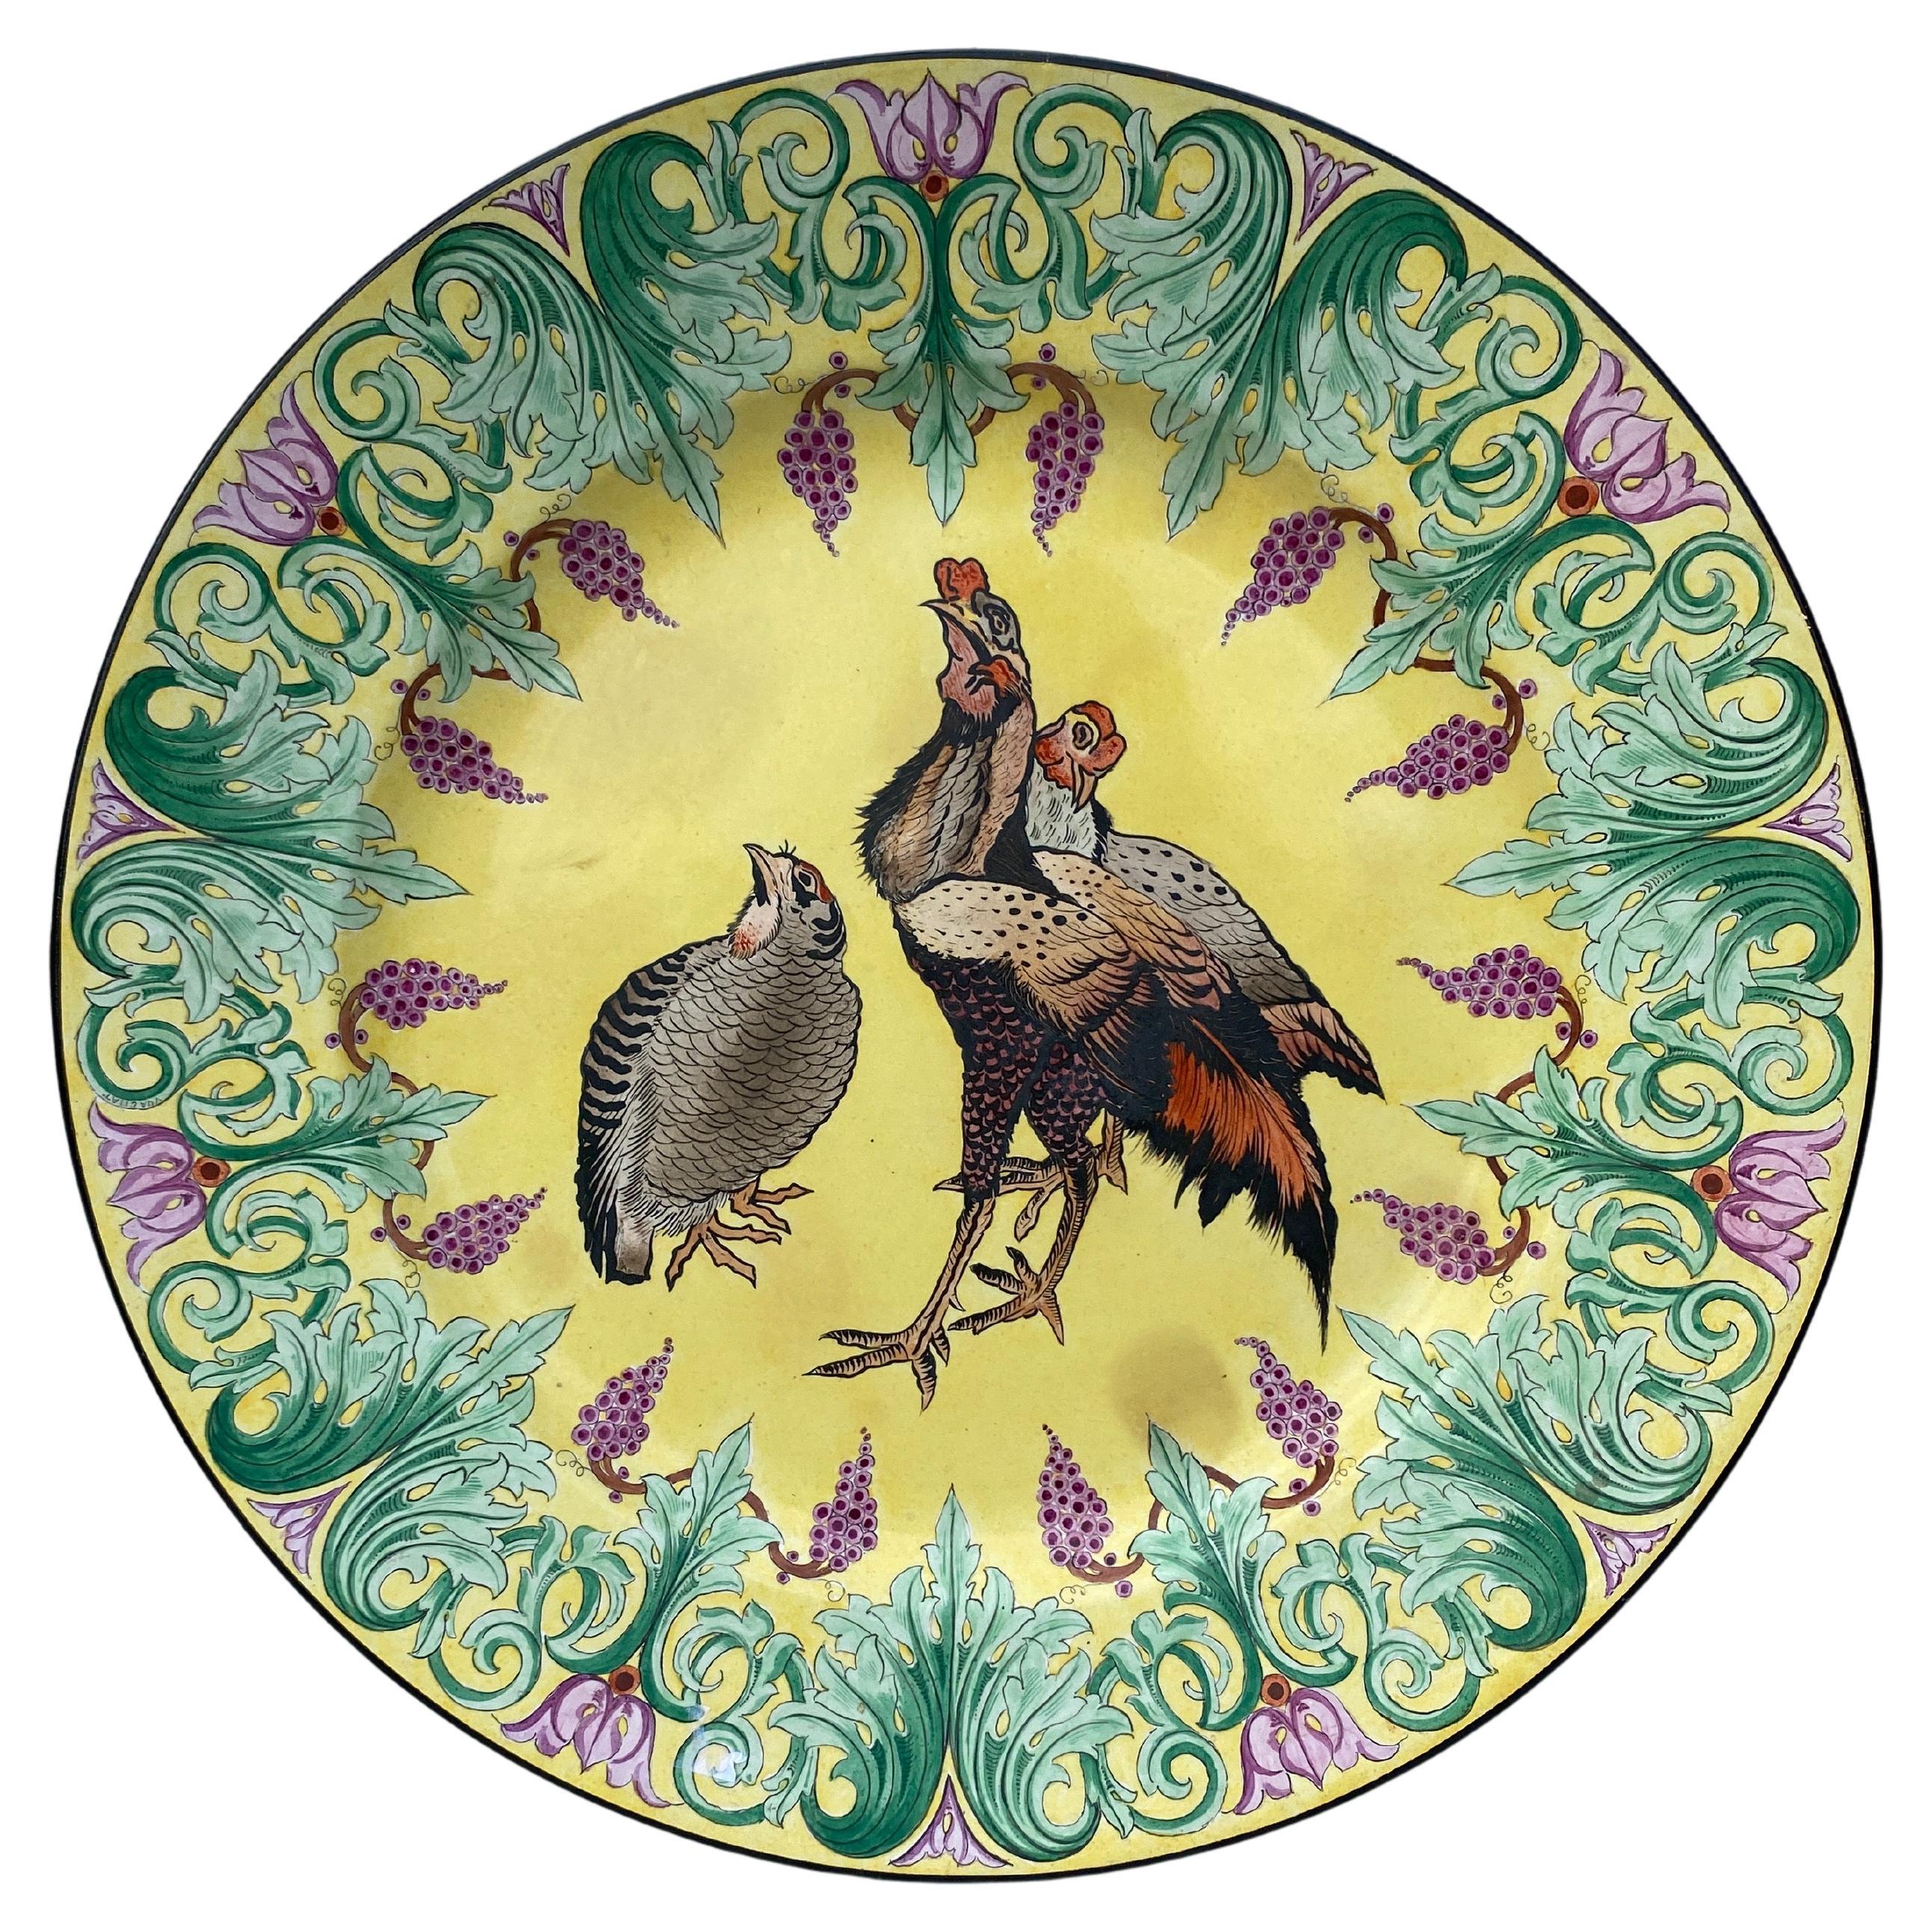 Large French Platter Rooster Choisy le Roi, circa 1840